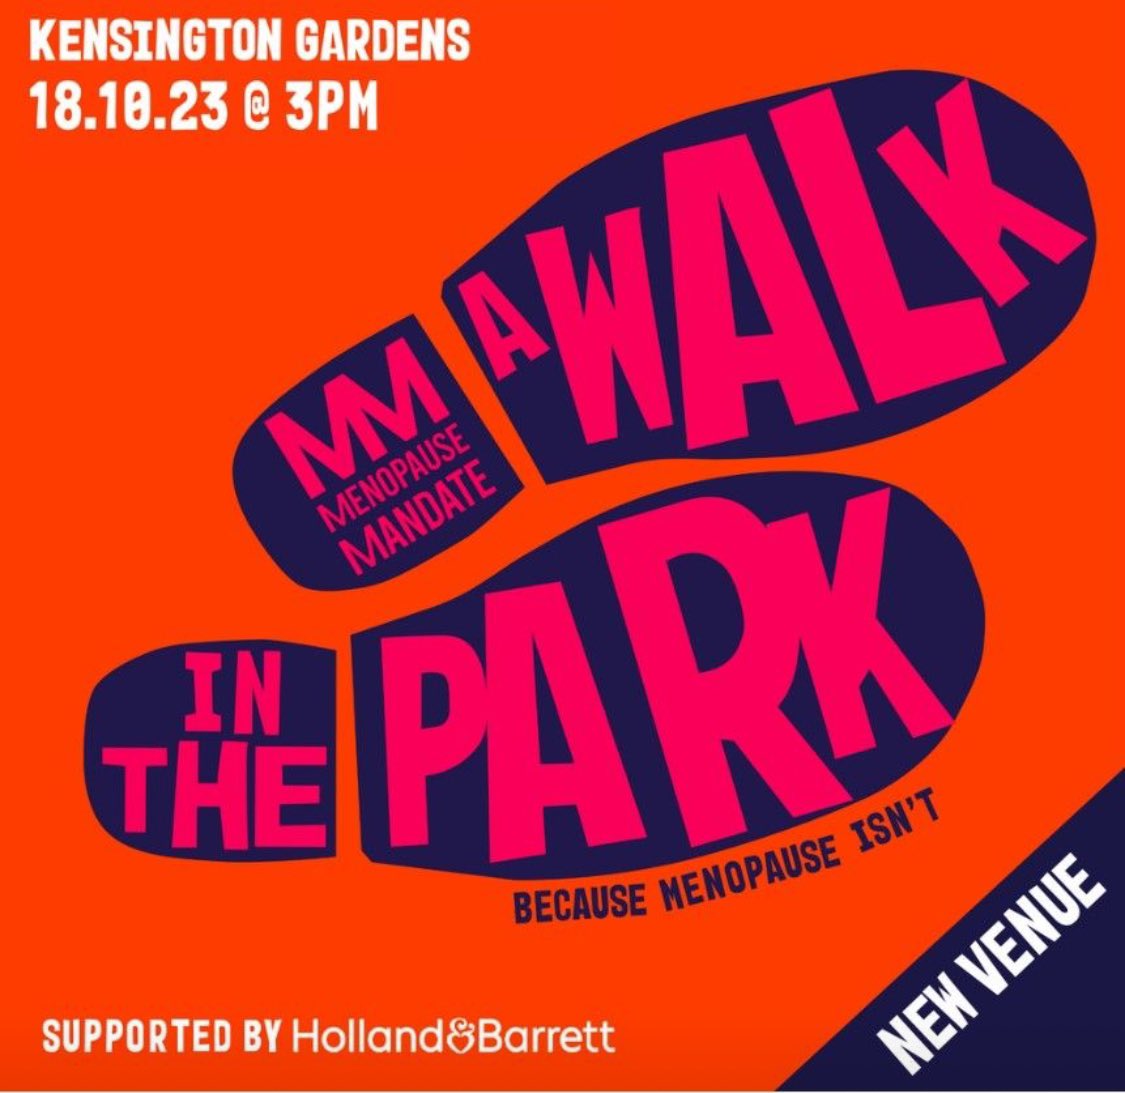 Just signed up to #menopausemandate #walkinthepark
Looking forward to being surrounded by people looking to make changes in the way this transition is managed at home, in the workplace & in life.  Can't wait! #menopause #perimenopause #menopauseatwork #healthandwellbeing